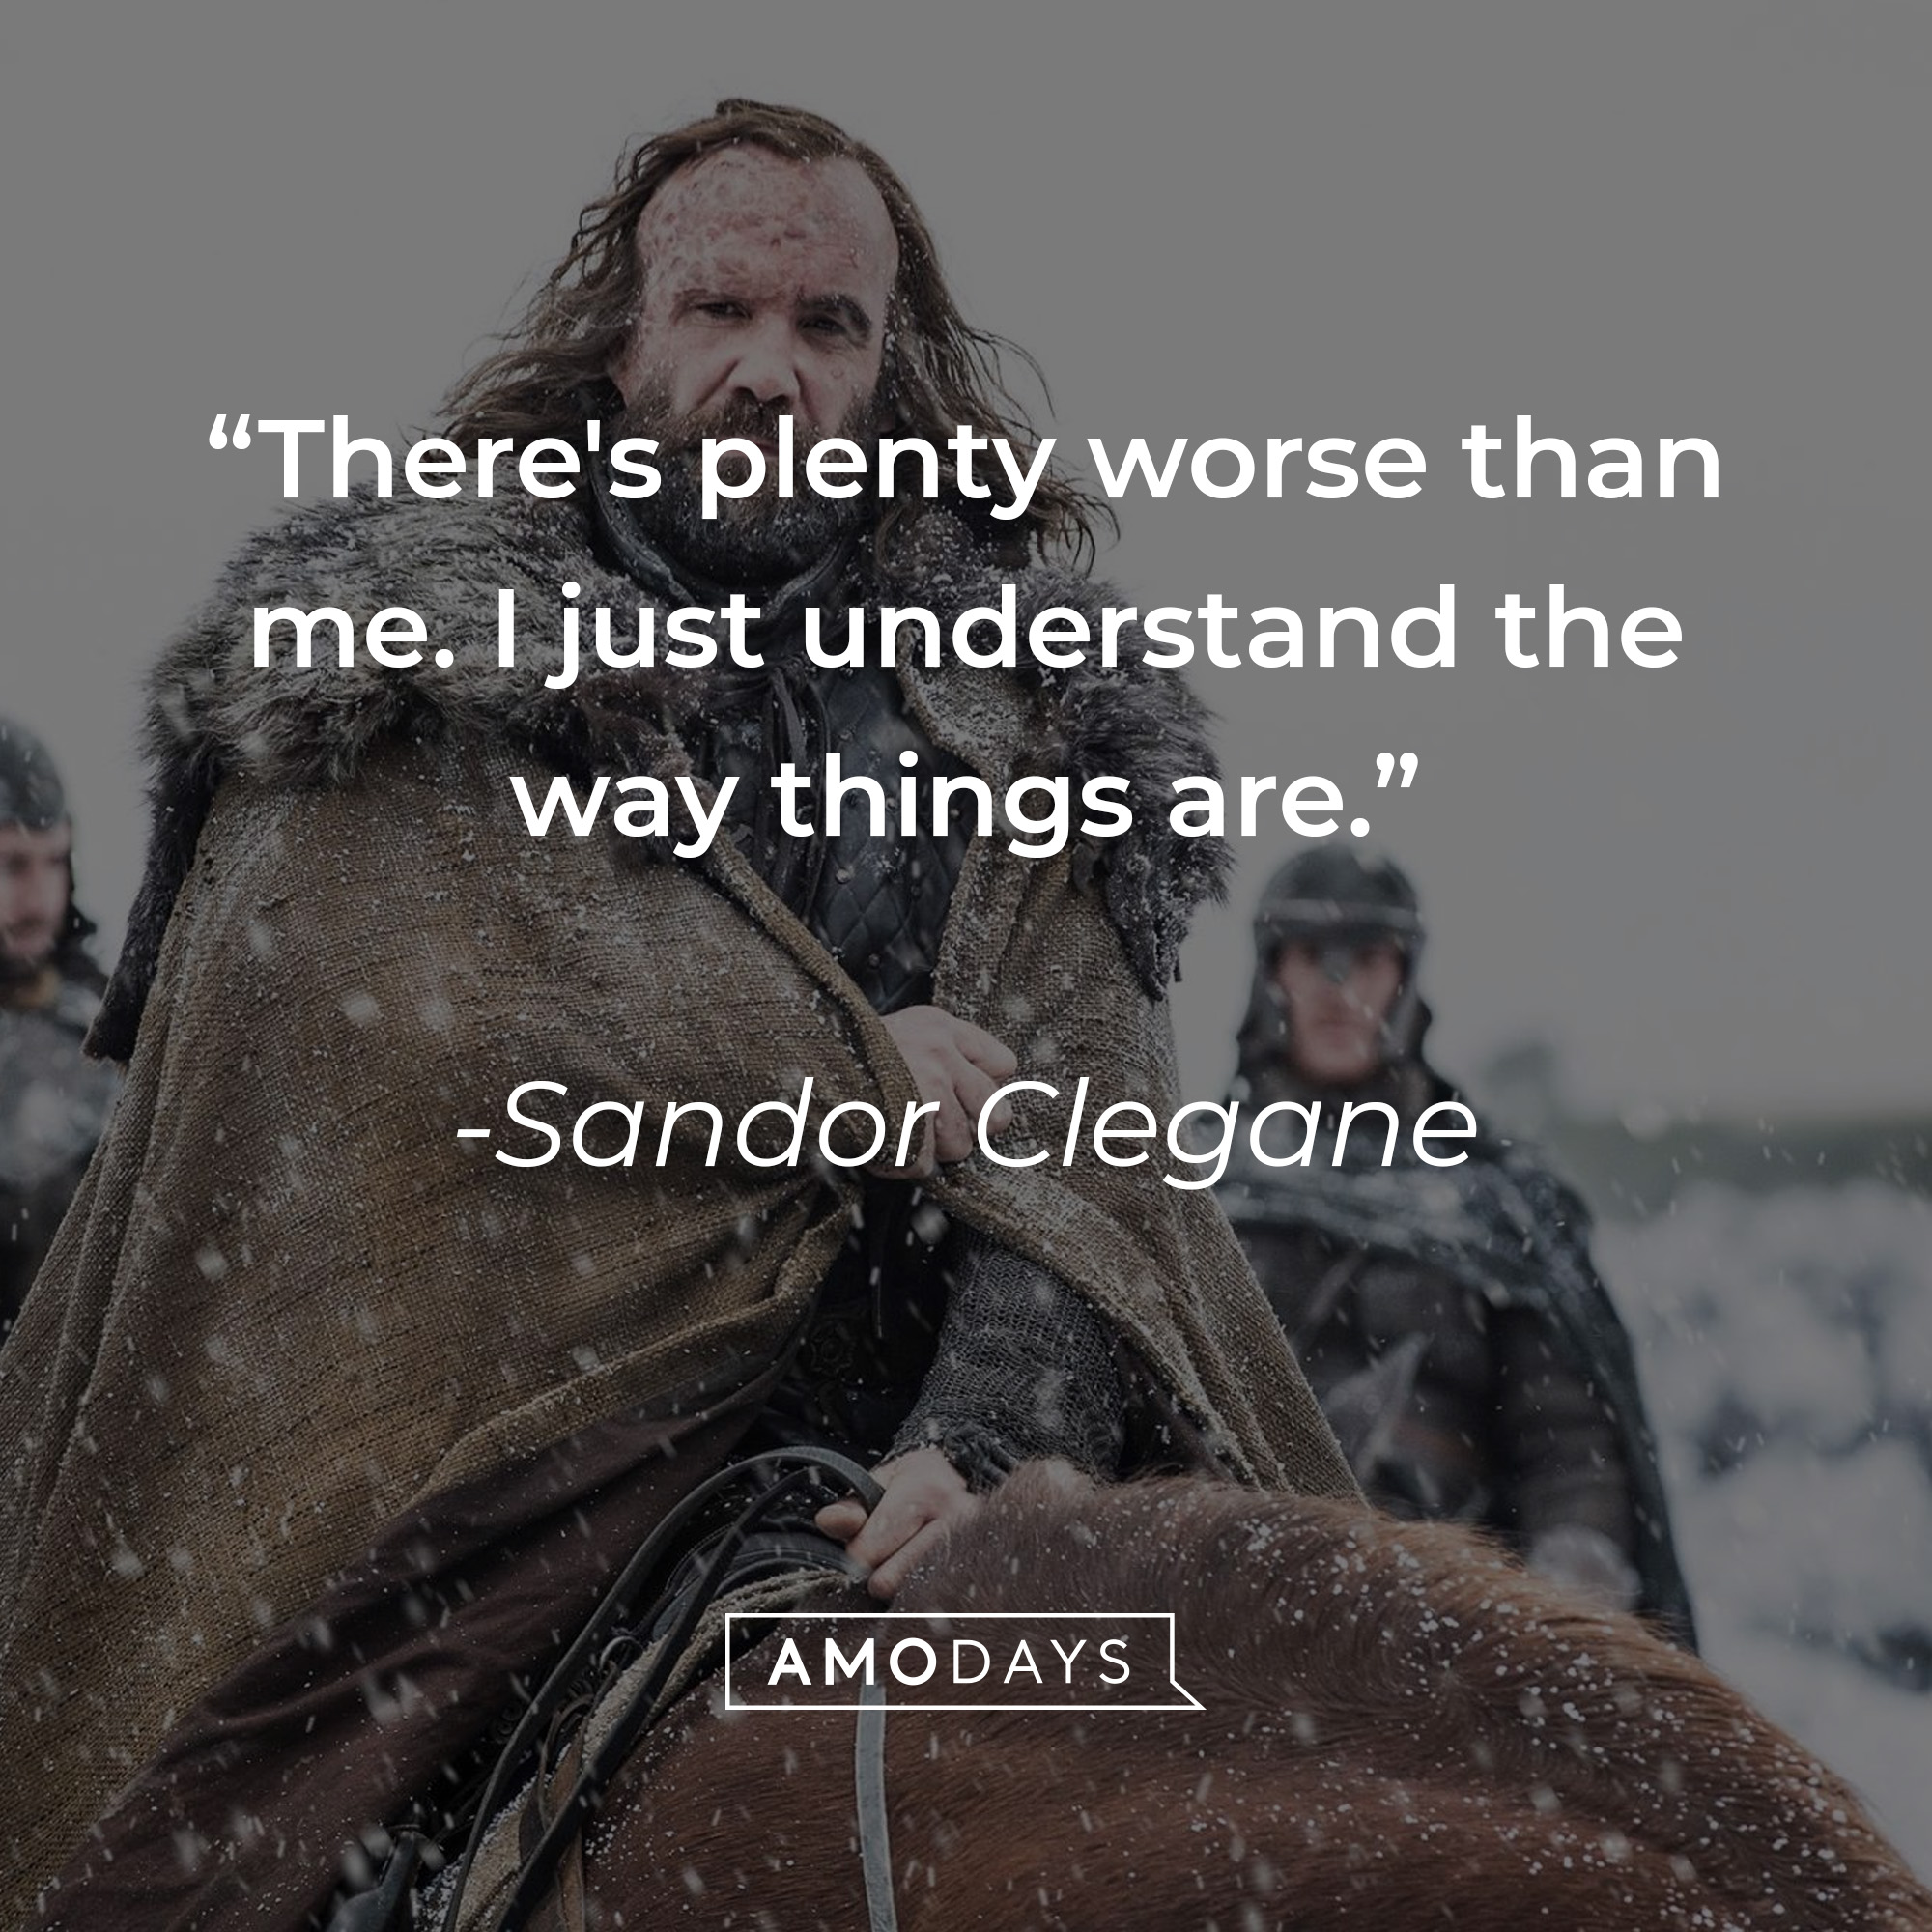 Sandor Clegane's quote: "There's plenty worse than me. I just understand the way things are." | Source: facebook.com/GameOfThrones